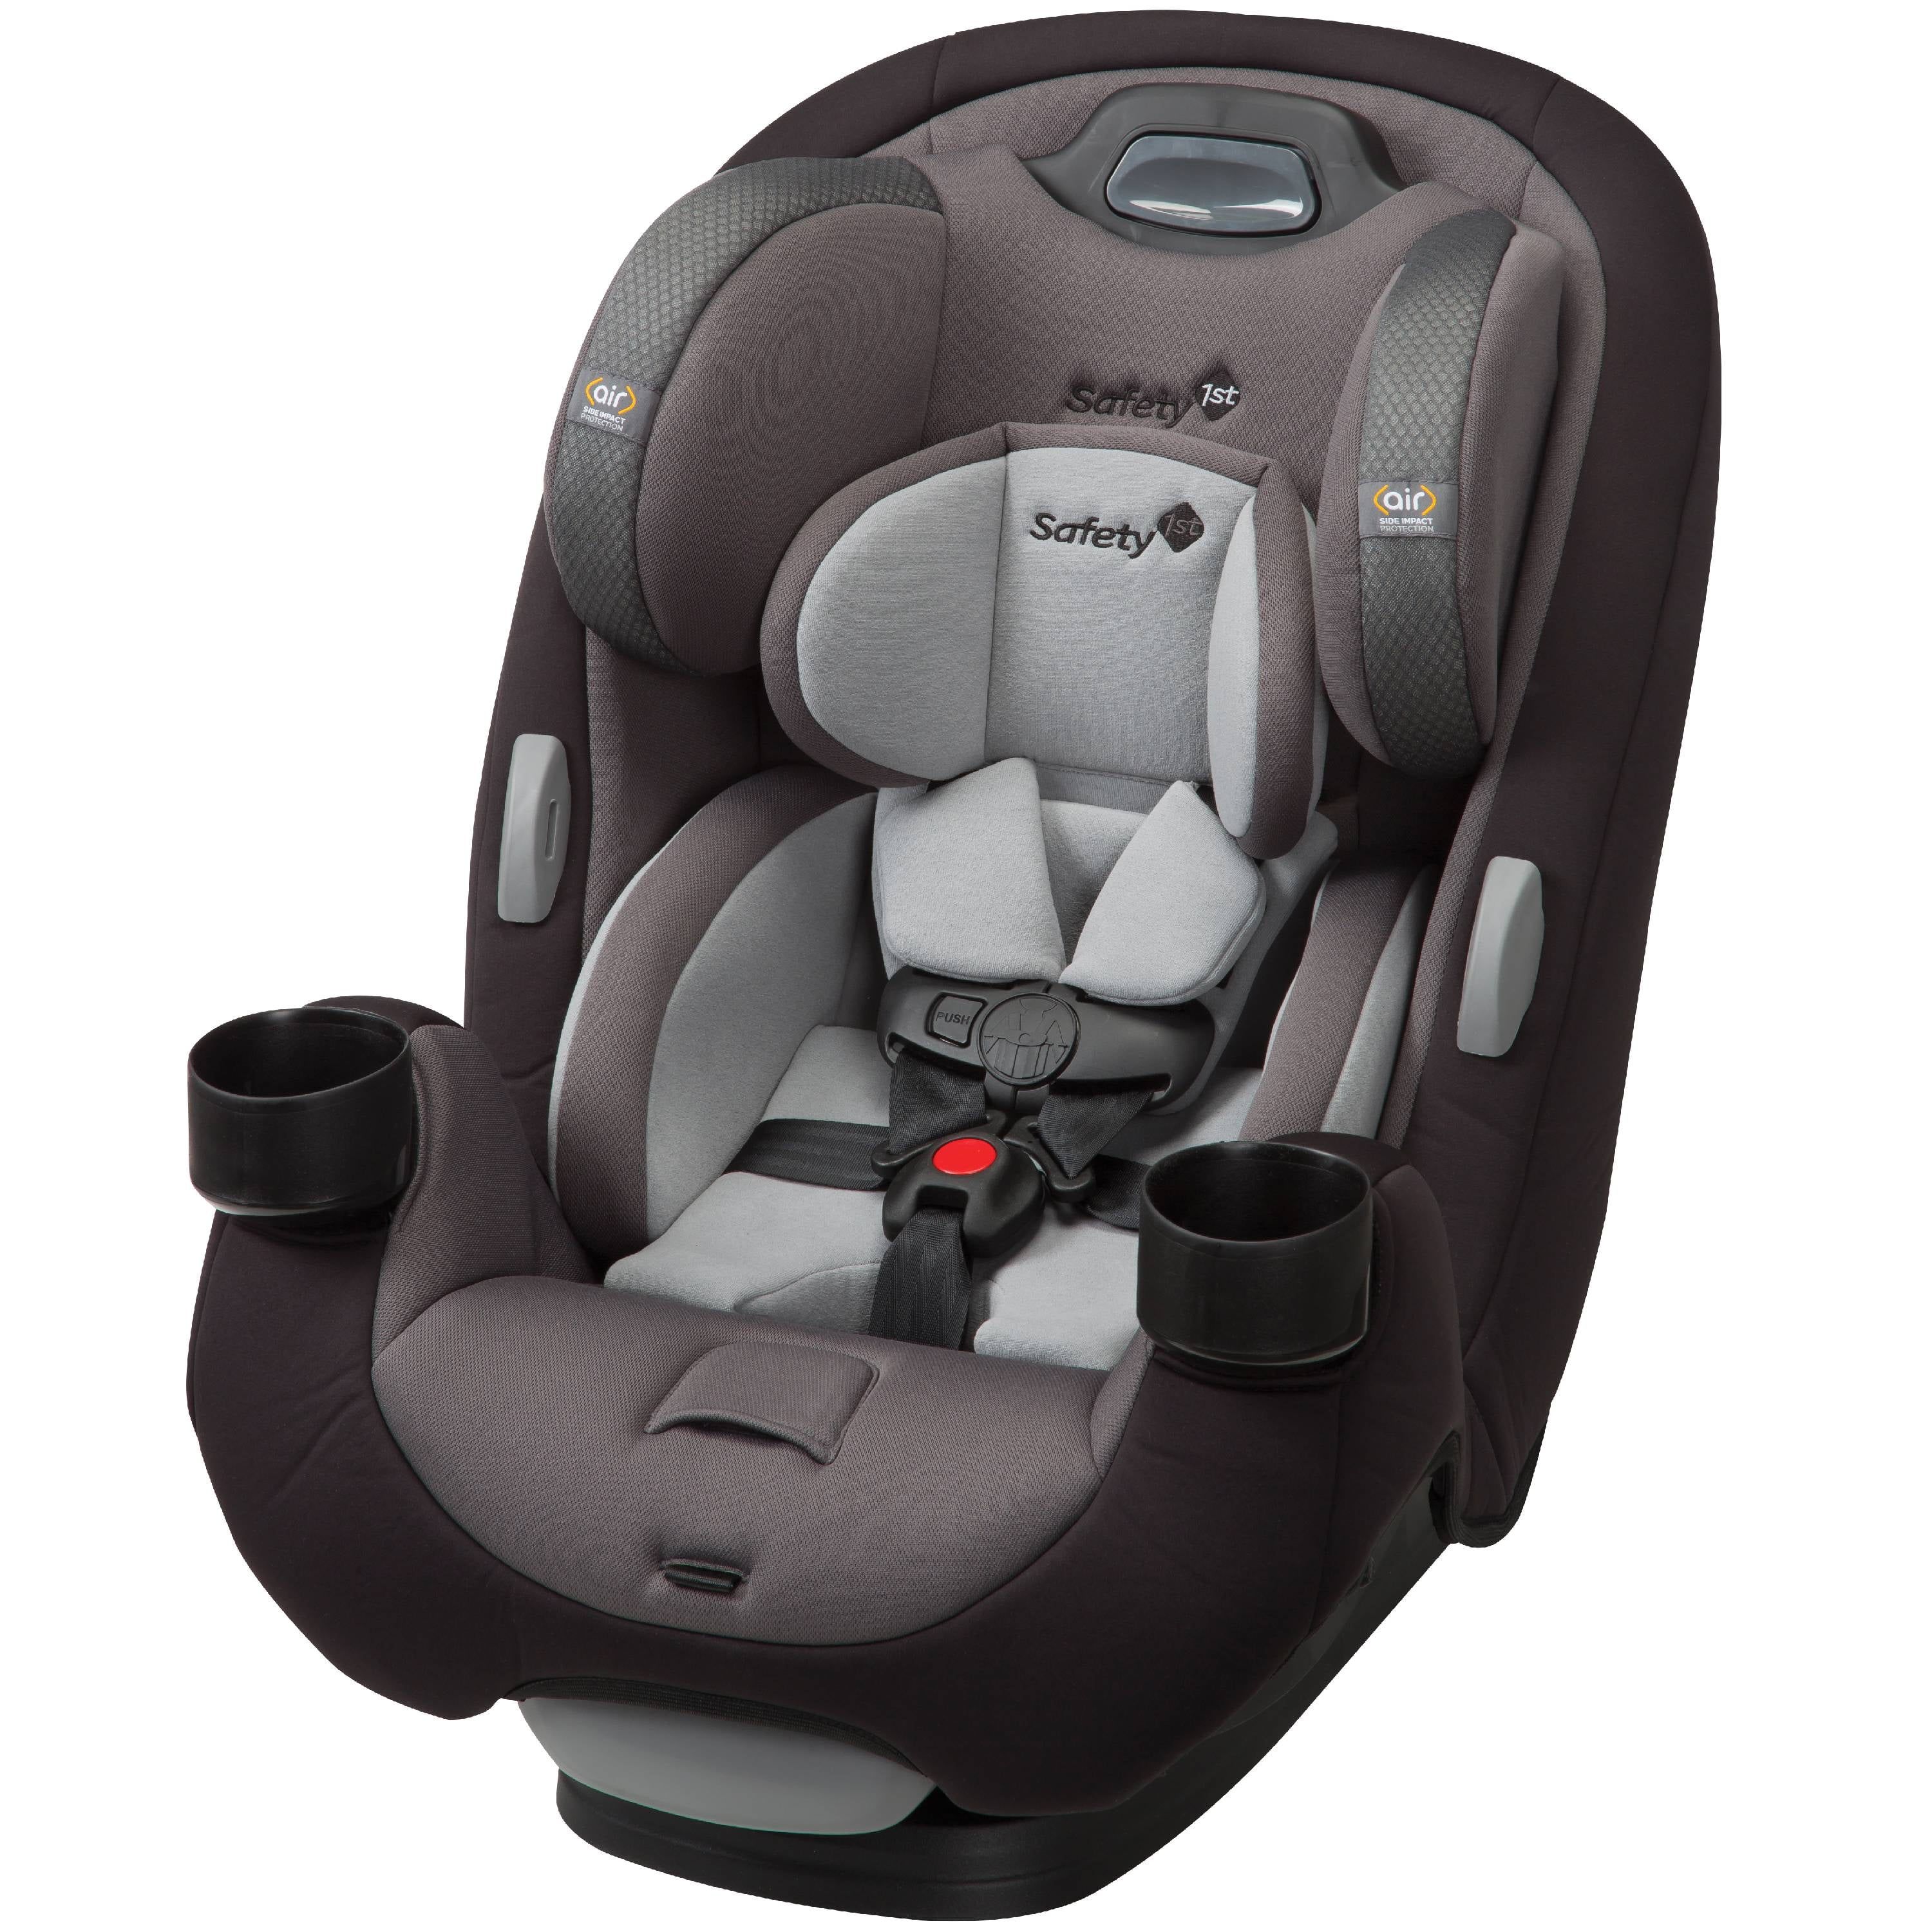 Safety 1st MultiFit EX Air All-in-One Car Seat, Amaro, Toddler | Walmart (US)